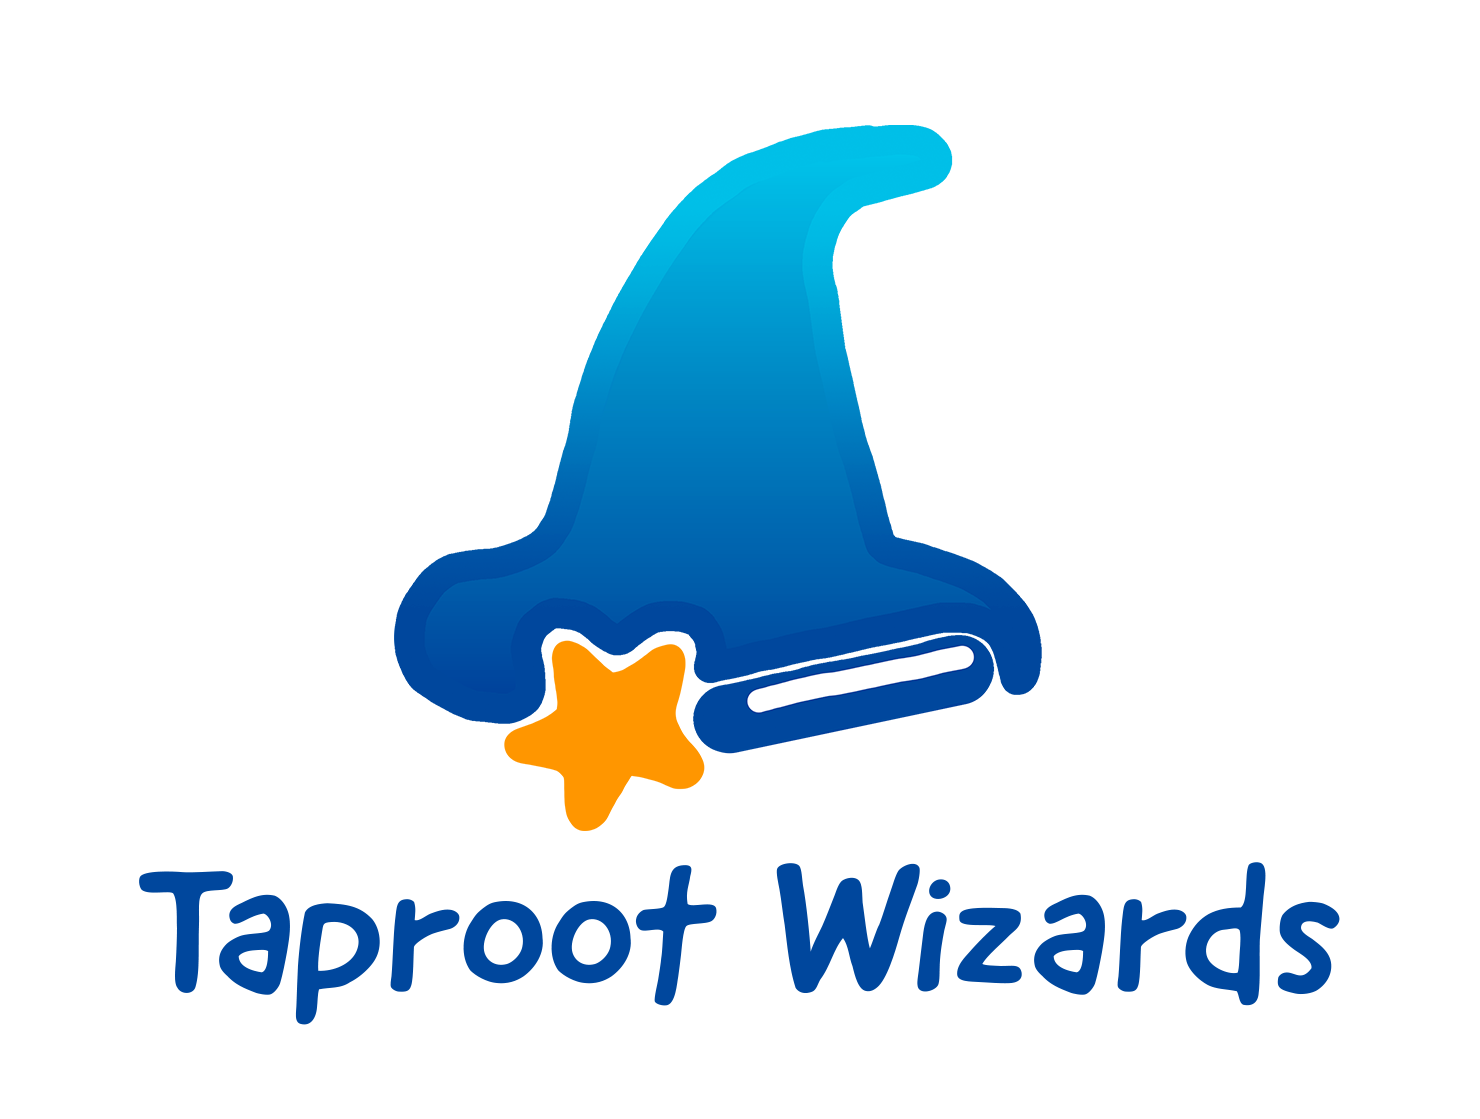 Taproot Wizards